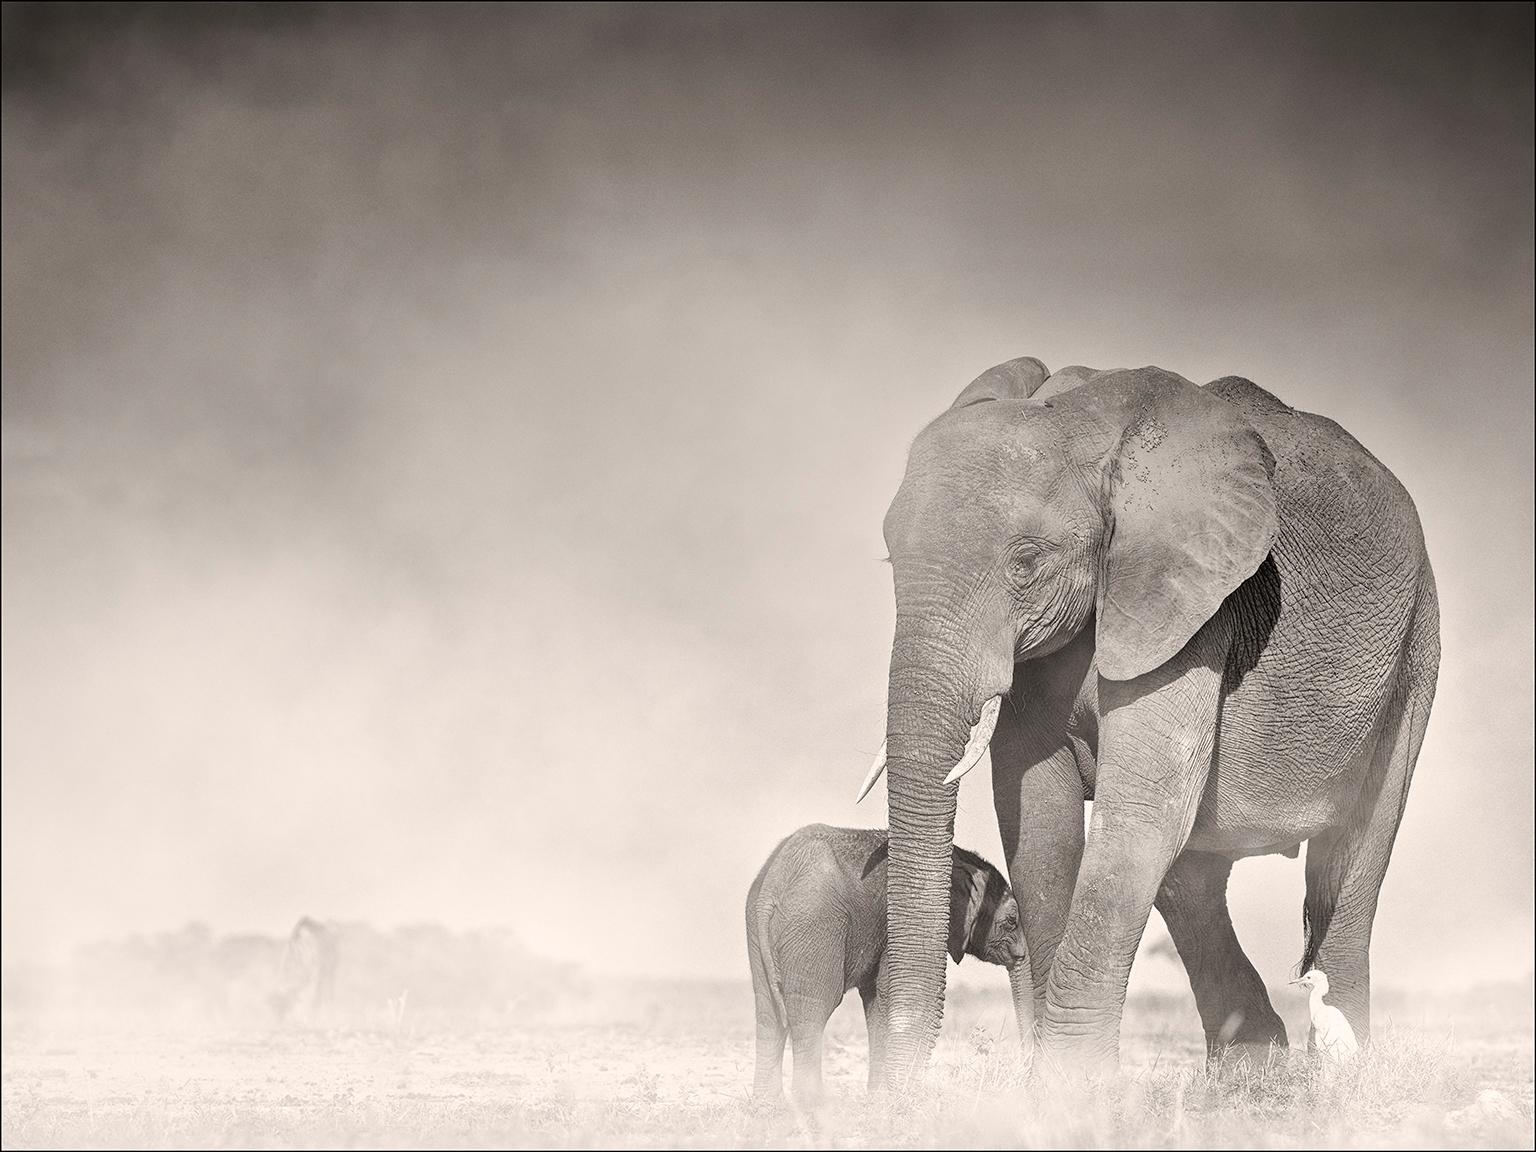 Joachim Schmeisser Black and White Photograph - Connected, Kenya, Elephant, animal, wildlife, black and white photography